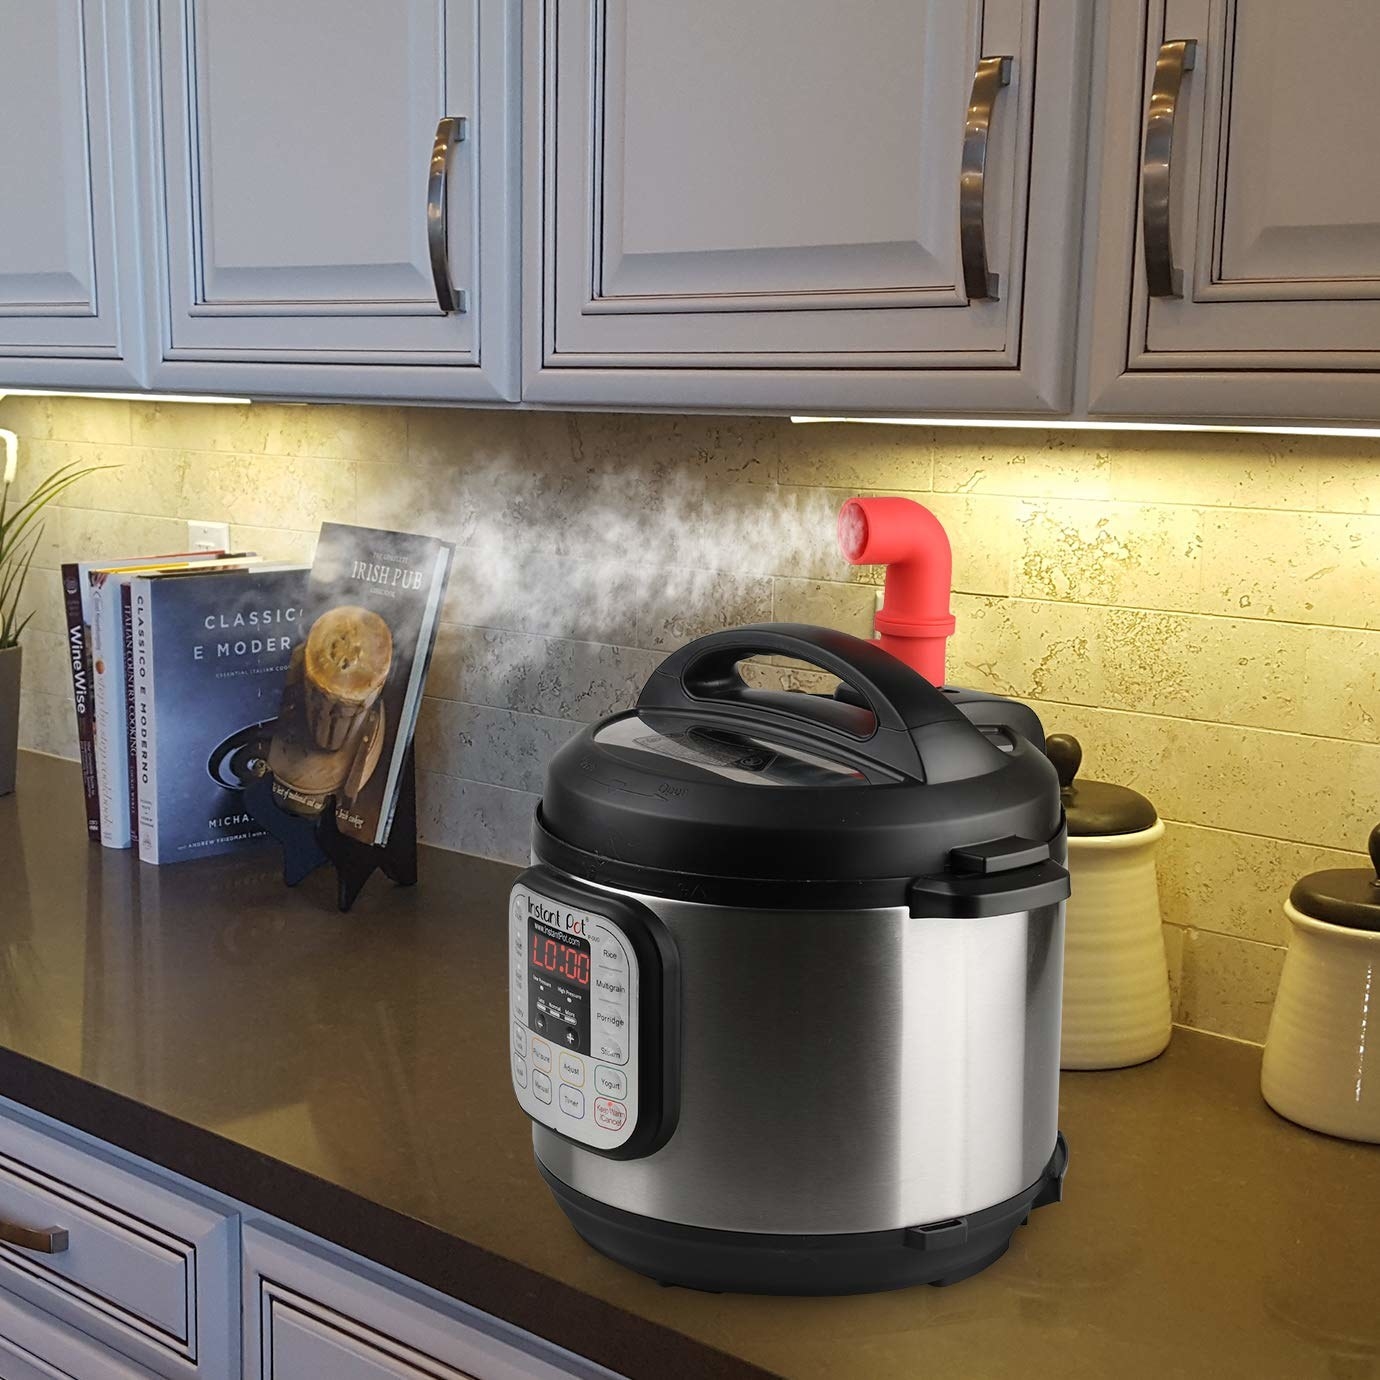 the red diverter curved to aim steam away from cabinets horizontally